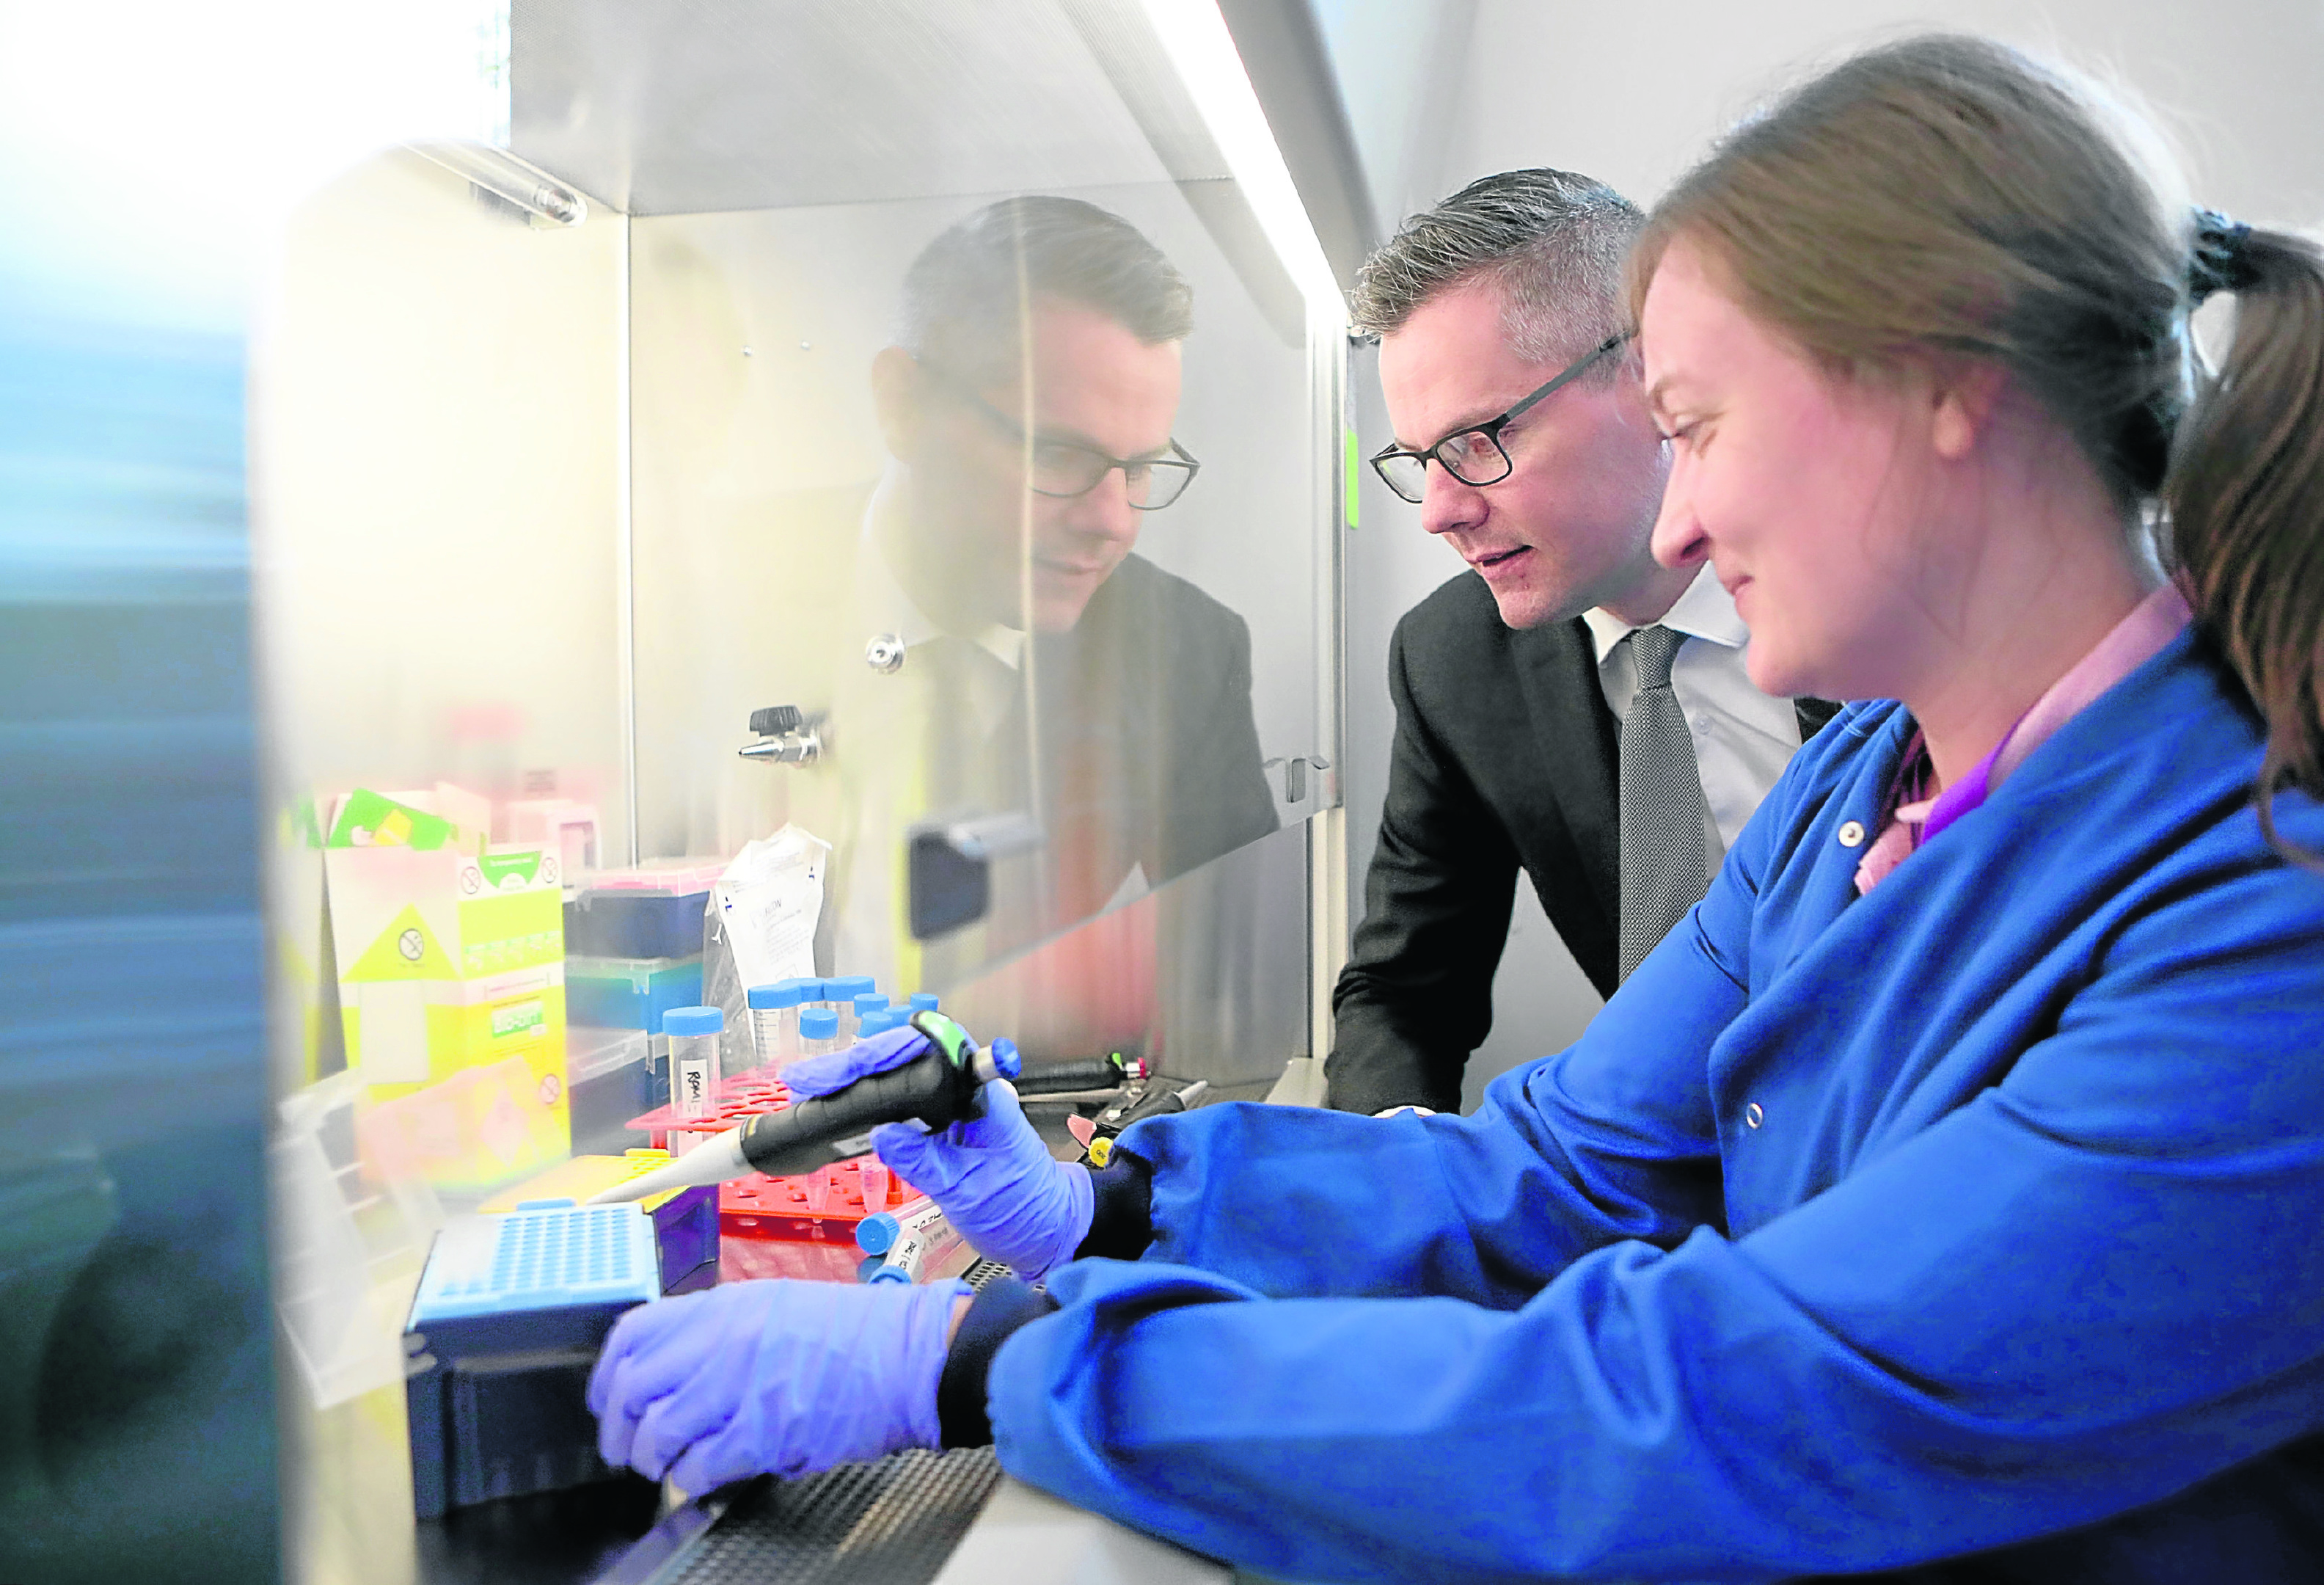 Finance Secretary Derek Mackay with Dr Joanne Hay during a visit to life sciences business, Aquila Biomedical, yesterday